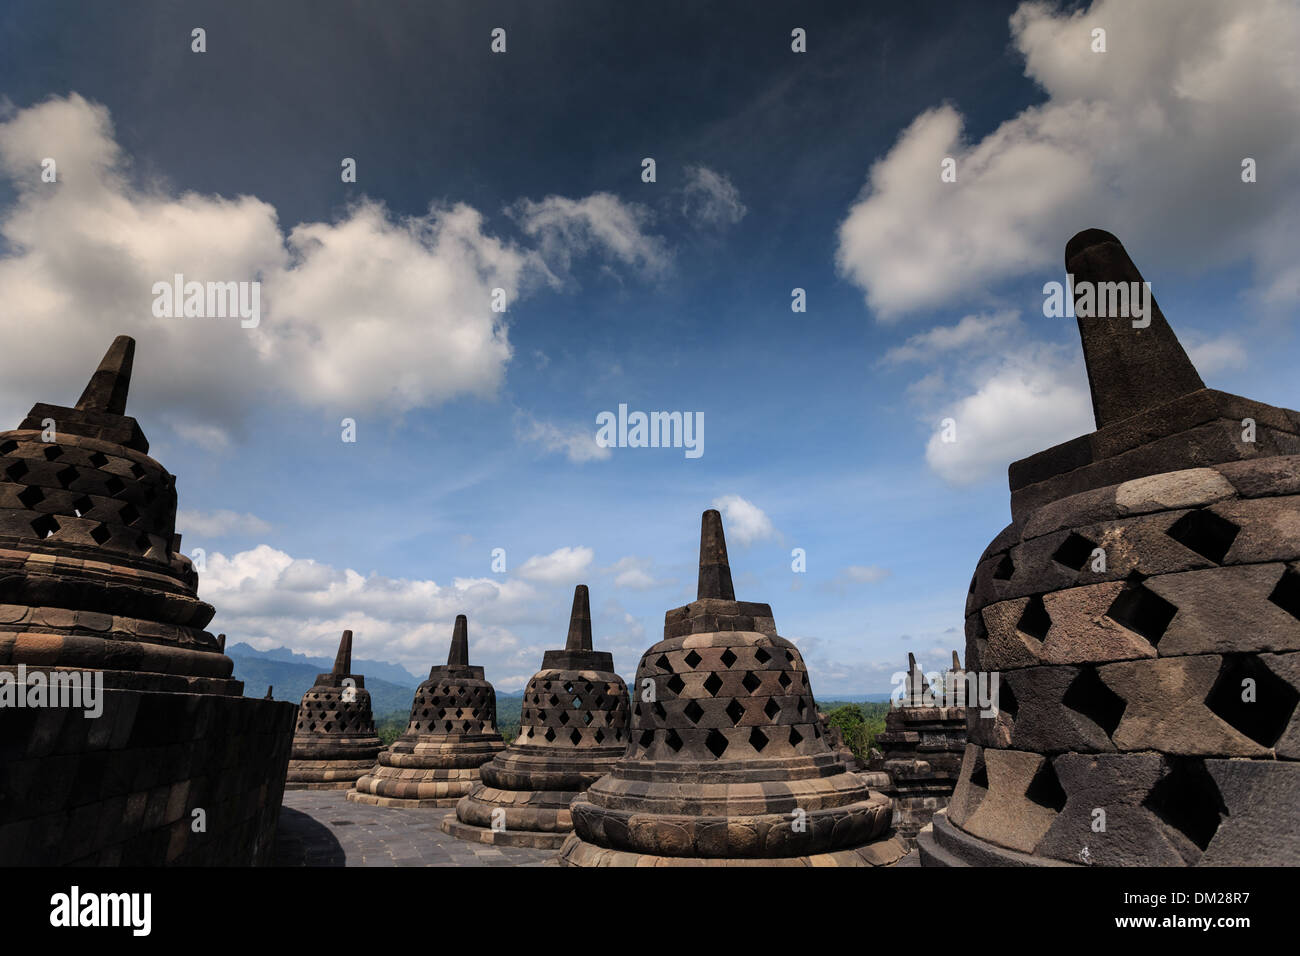 BOROBUDOR IN YOGYAKARTA INDONESIA IS THE BIGGEST BUDHA TEMPLE IN THE WORLD. A WORLD HERITAGE LIST NUMBER 592. Stock Photo